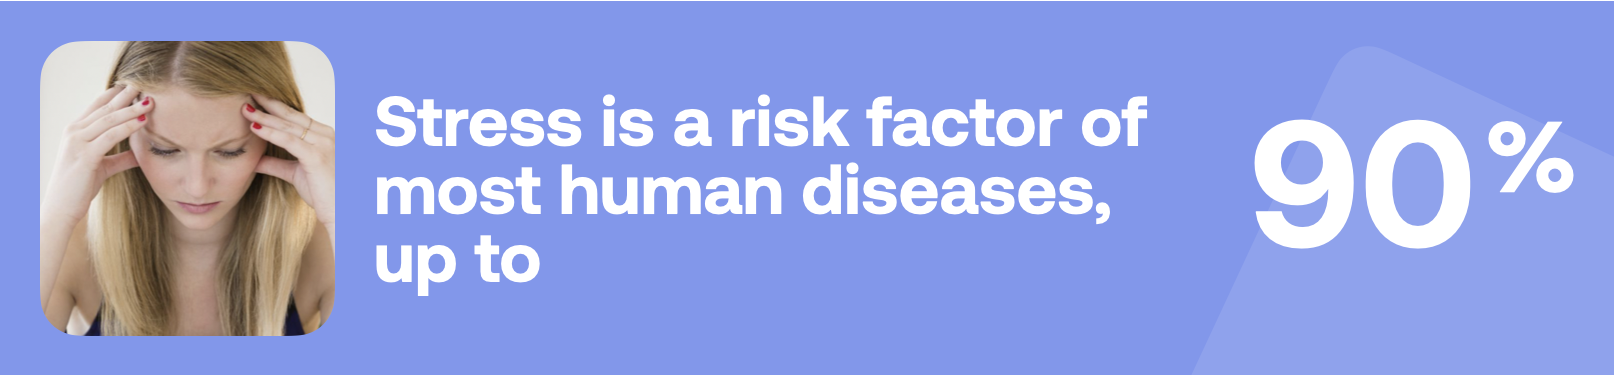 Stress stats is a risk factor of most human diseases, up to 90%